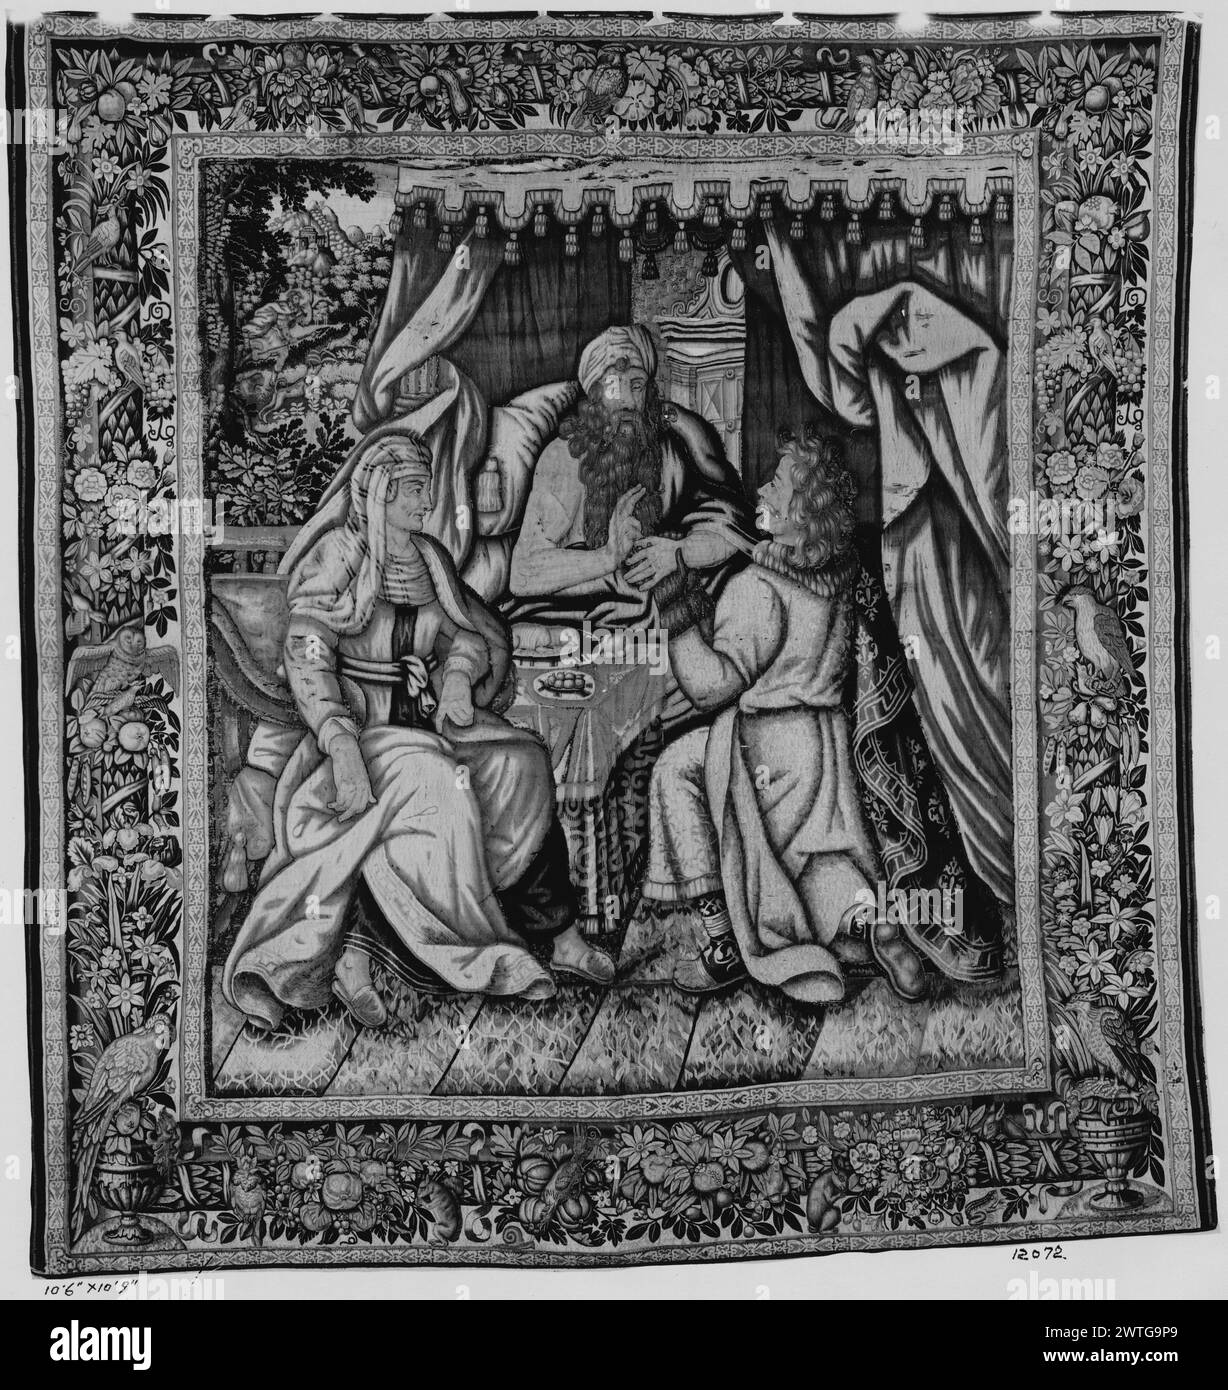 Isaac's blessing of Jacob and Esau. unknown c. 1625-1650 (central field) Tapestry Dimensions: H 10'9' x W 10'6' Tapestry Materials/Techniques: unknown Culture: Flemish Weaving Center: unknown Ownership History: French & Co. In bedchamber, Isaac lying in bed blesses Jacob who, disguised in Esau's clothes, brings food to his father; Jacob's hands & neck are covered with goatskins (Genesis 27) (BRD) garland of flowers & fruit with animals (birds & squirrels) twisting around central rod with palm tree trunk motif; (LWR BRD) birds perched atop vases with flowers The border & the [central] field sho Stock Photo